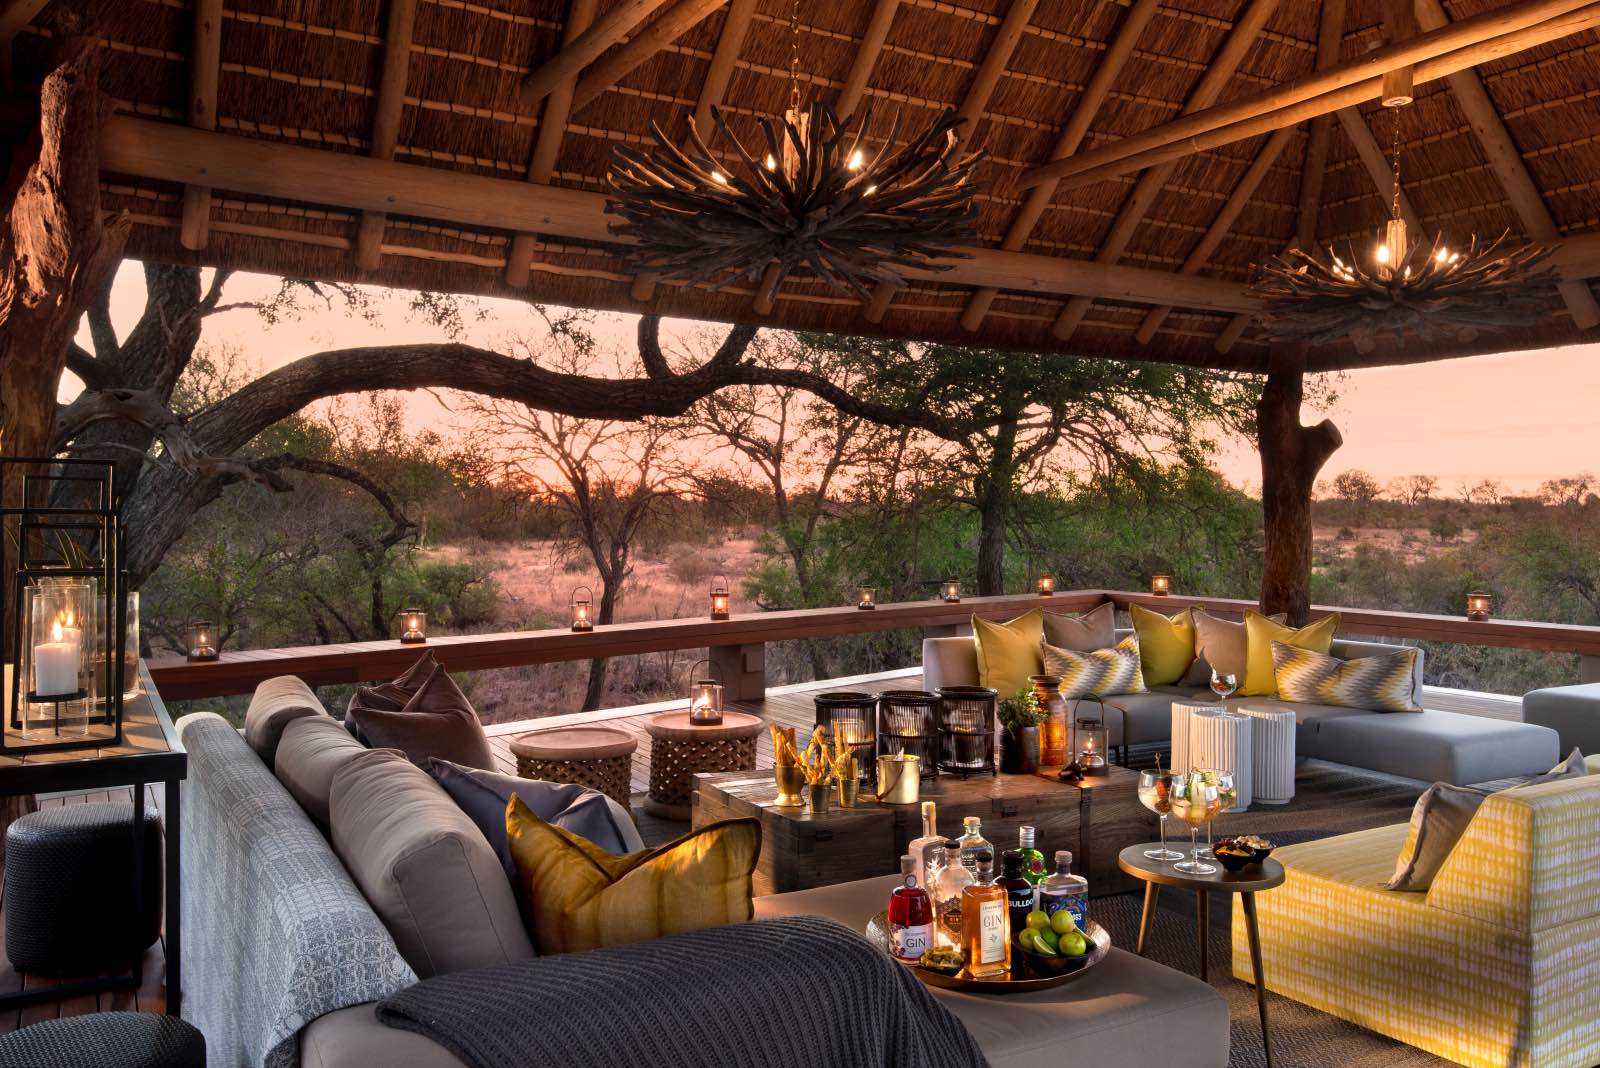 Lounge under thatch on a wooden deck with a view onto the surrounding bush